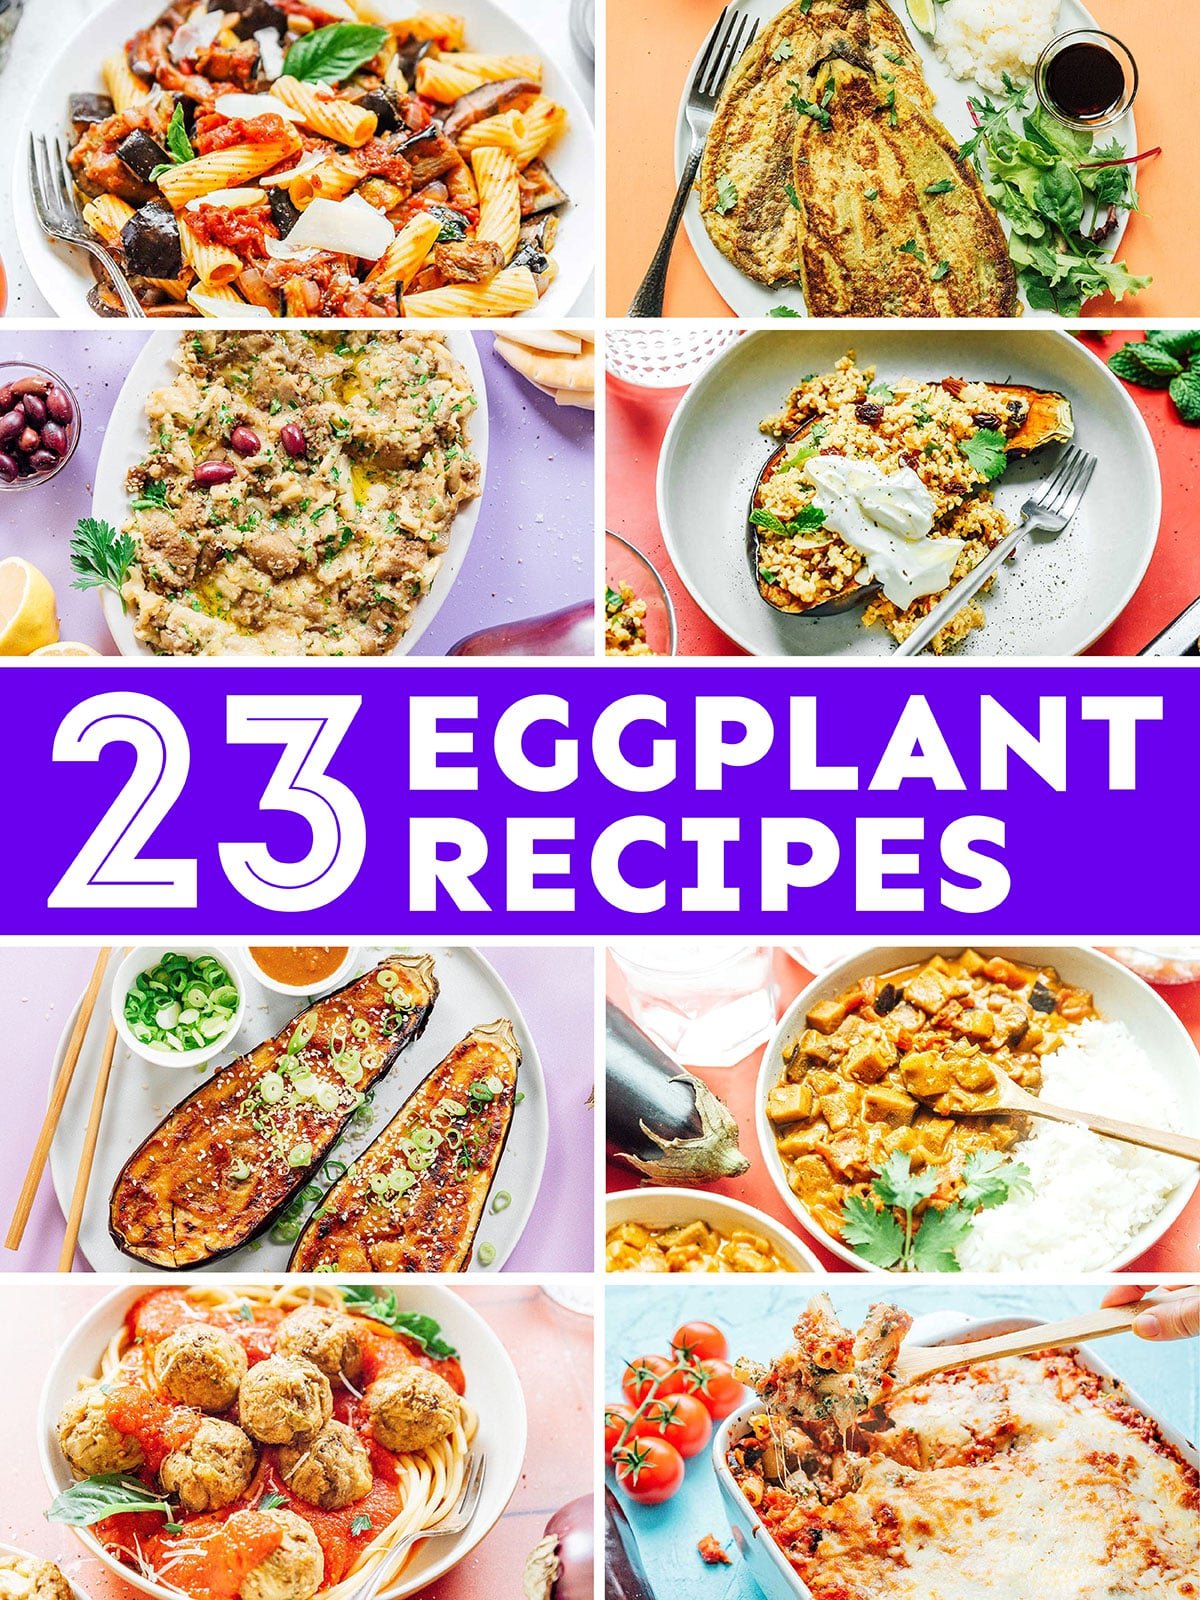 Collage that says "23 eggplant recipes".